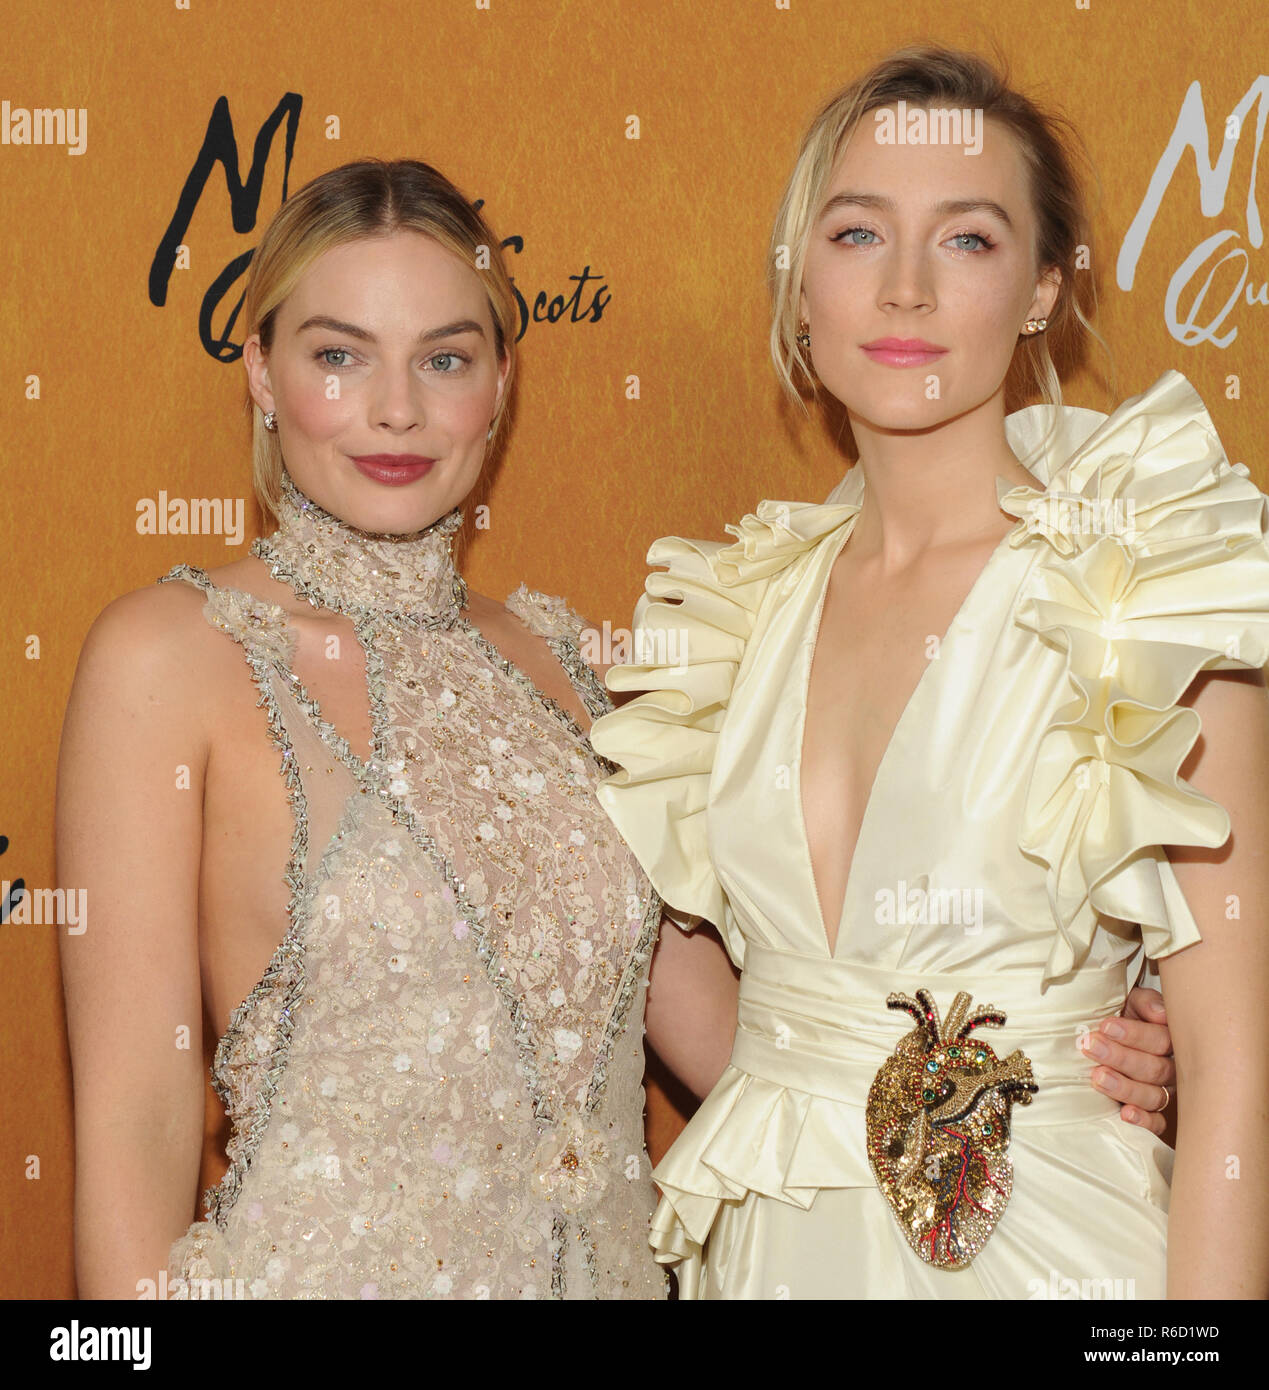 New York, NY, USA. 4th Dec, 2018. Margot Robbie and Saoirse Ronan attends the 'Mary Queen of Scots' New York Premiere at the Paris Theater on December 4, 2018 in New York City. Credit: John Palmer/Media Punch/Alamy Live News Stock Photo